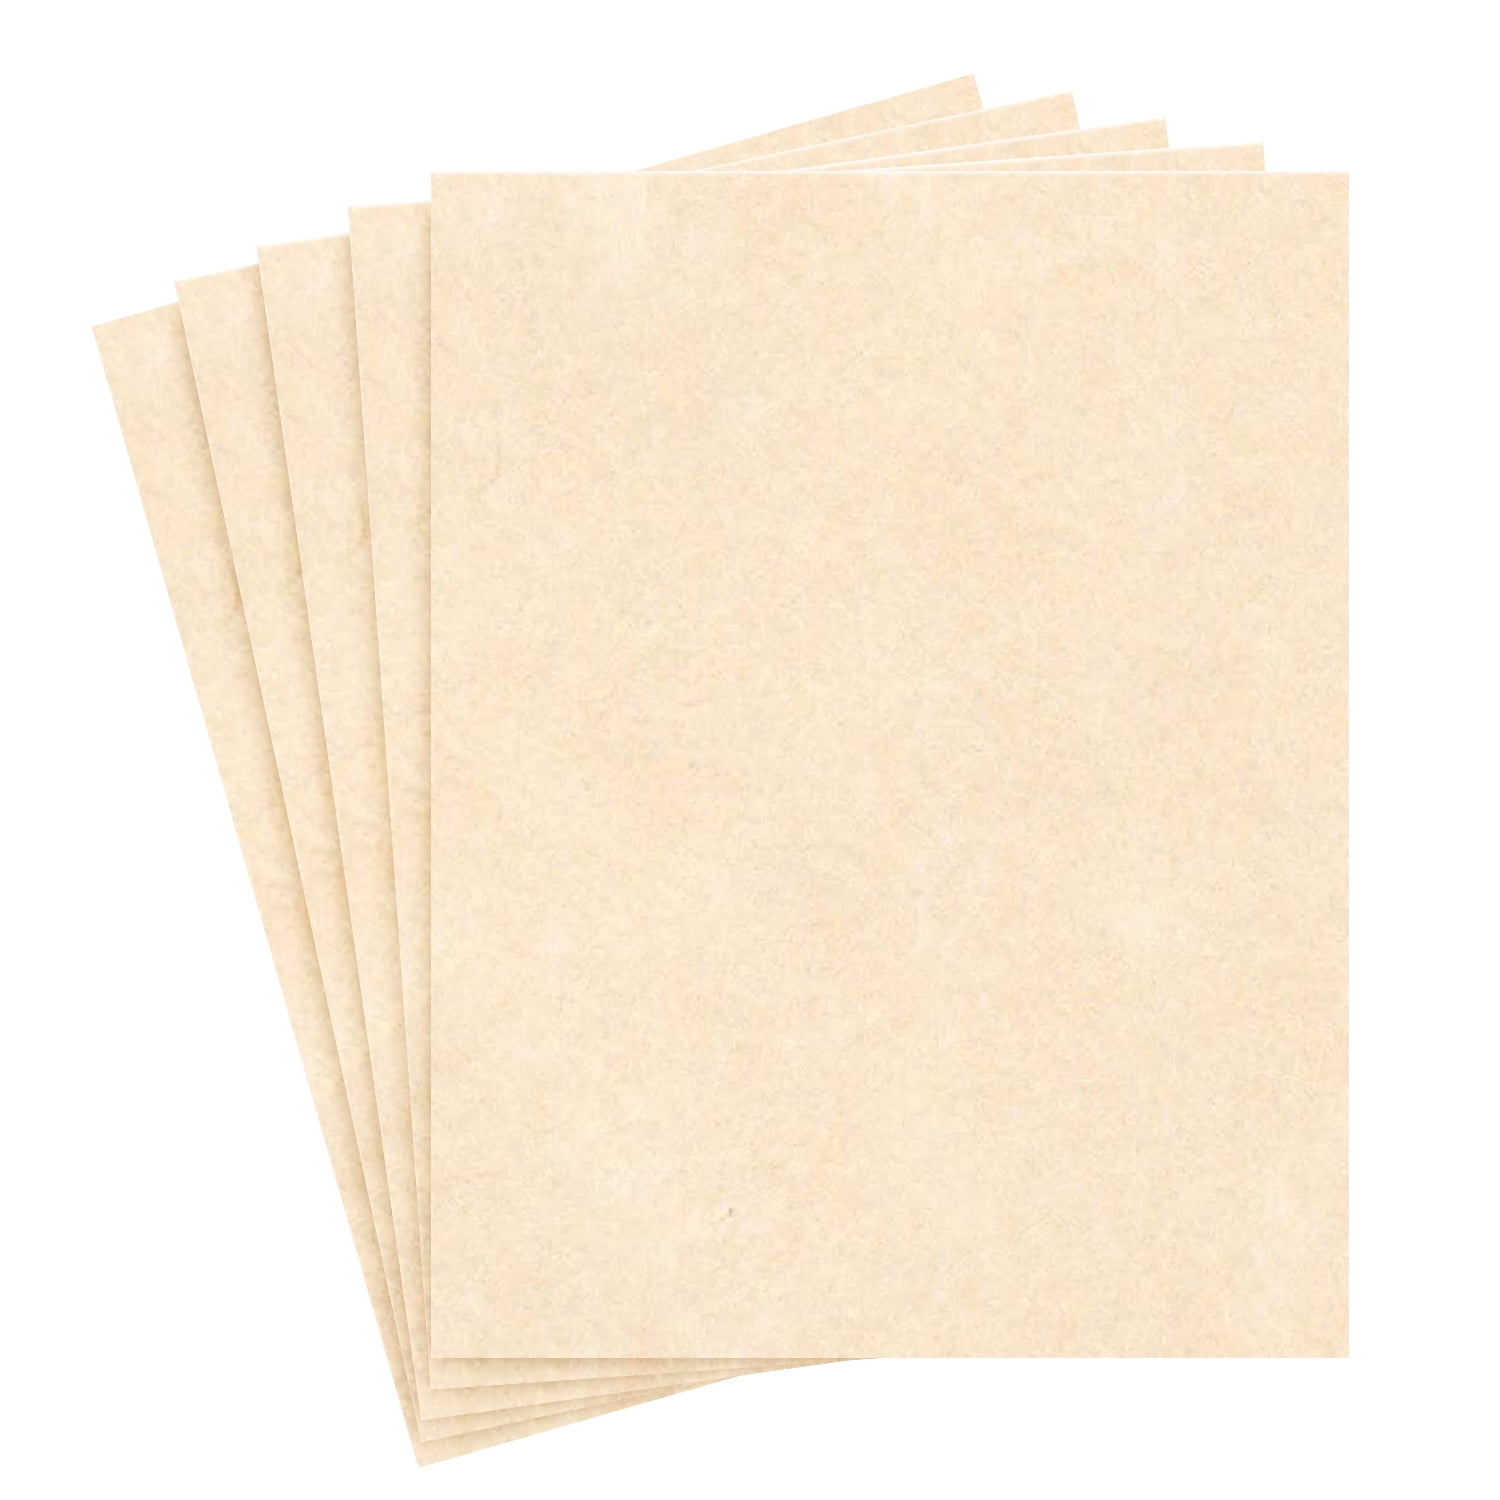 Aged Stationery Parchment Paper - Great for Writing, Certificates, Menus  and Wedding Invitations | 24lb Bond, 60lb Text (90GSM) | 11 x 17 | 50  Sheets